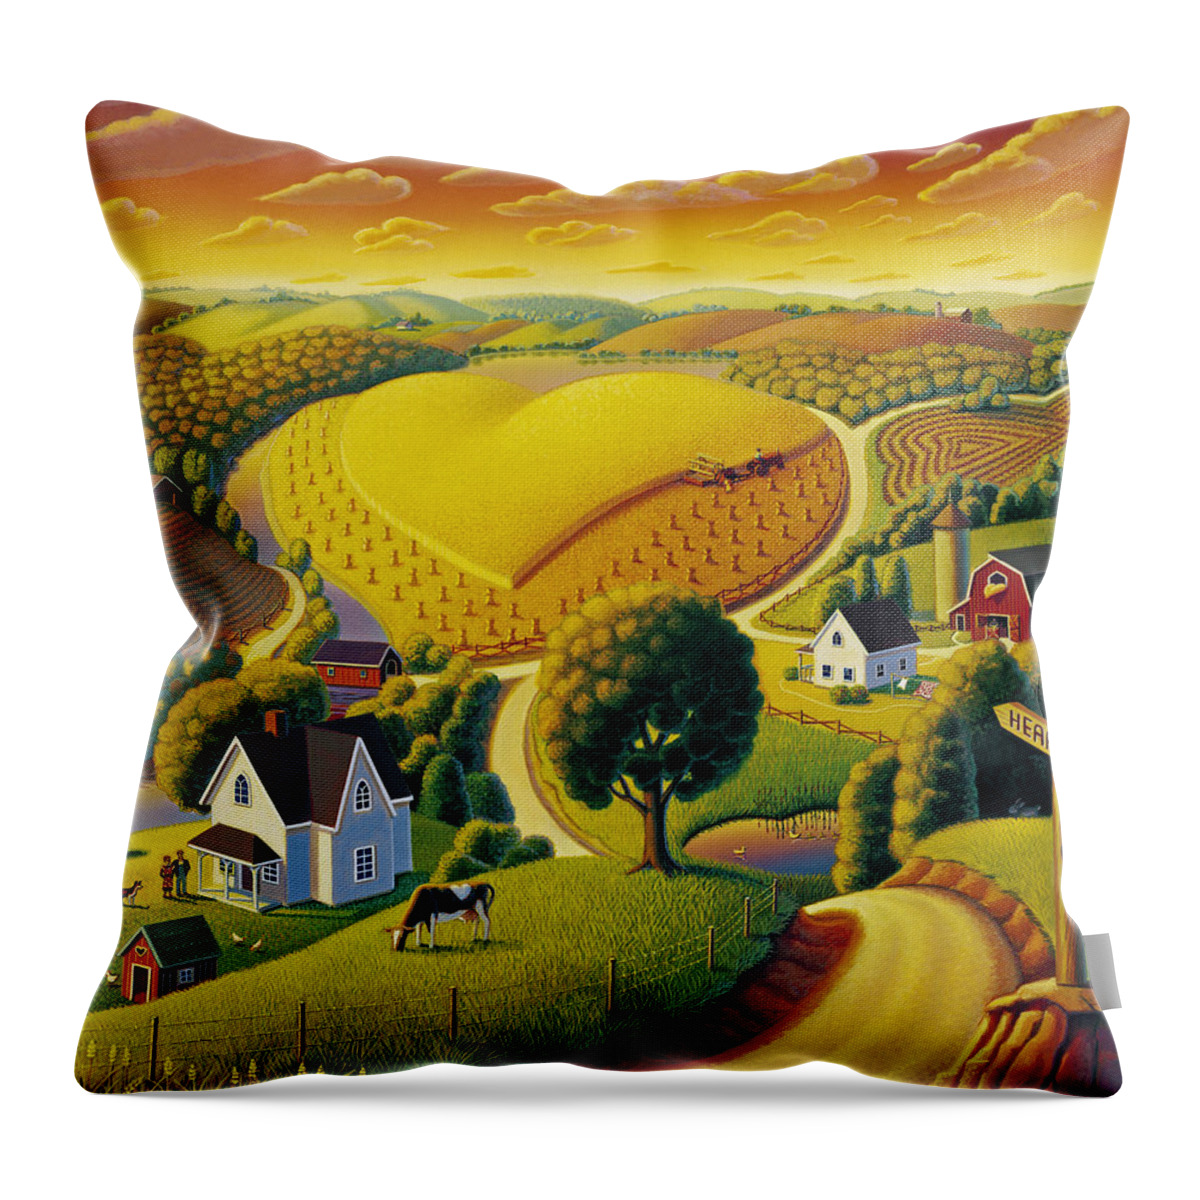 Heartland Throw Pillow featuring the painting Heartland by Robin Moline